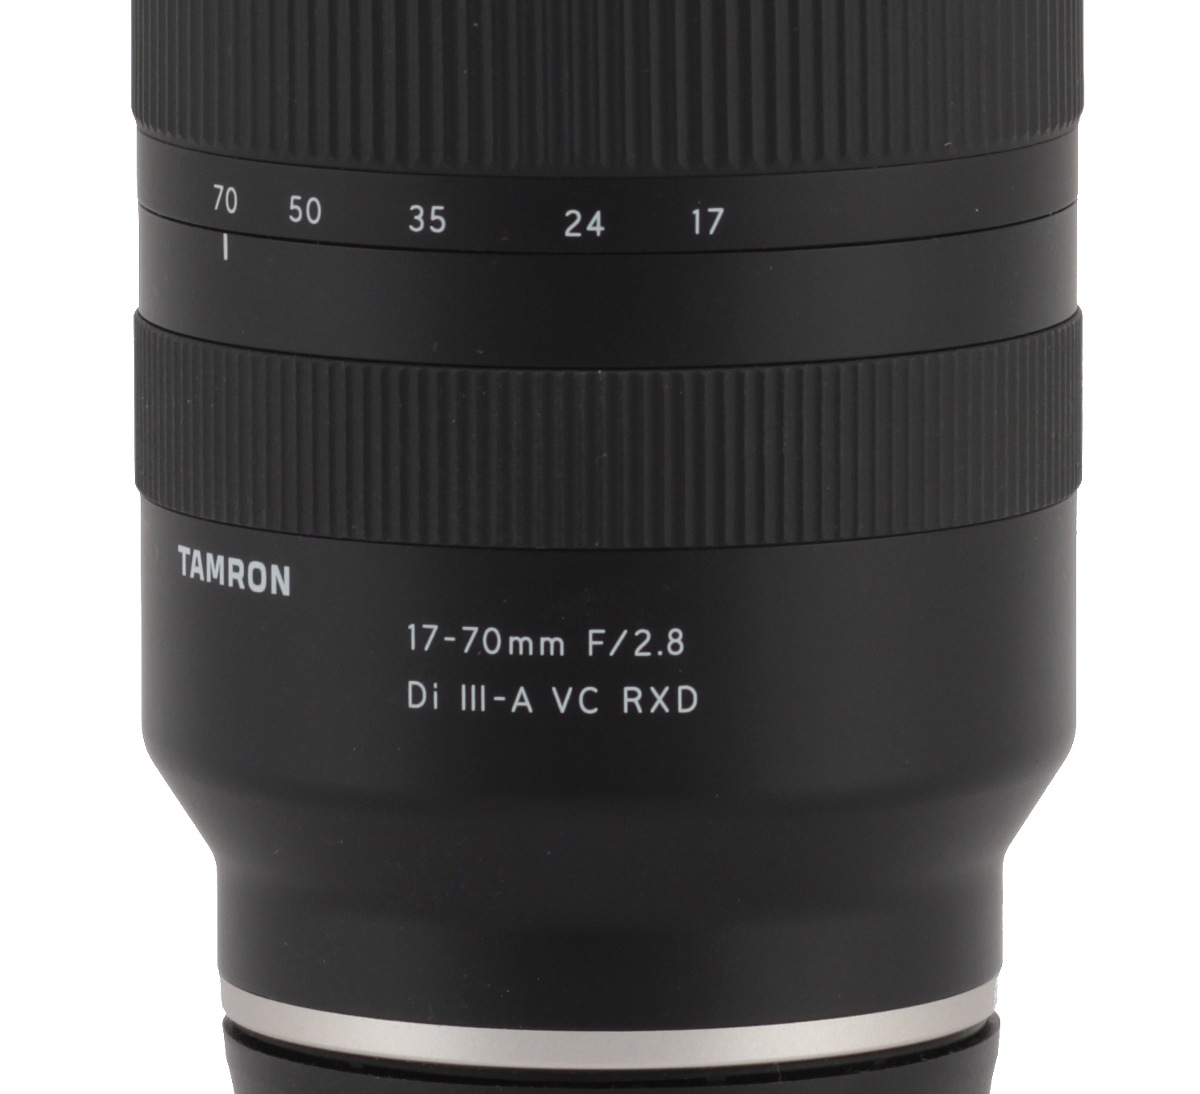 Review: Tamron 17-70mm F2.8 Di III-A VC RXD - Focus Review